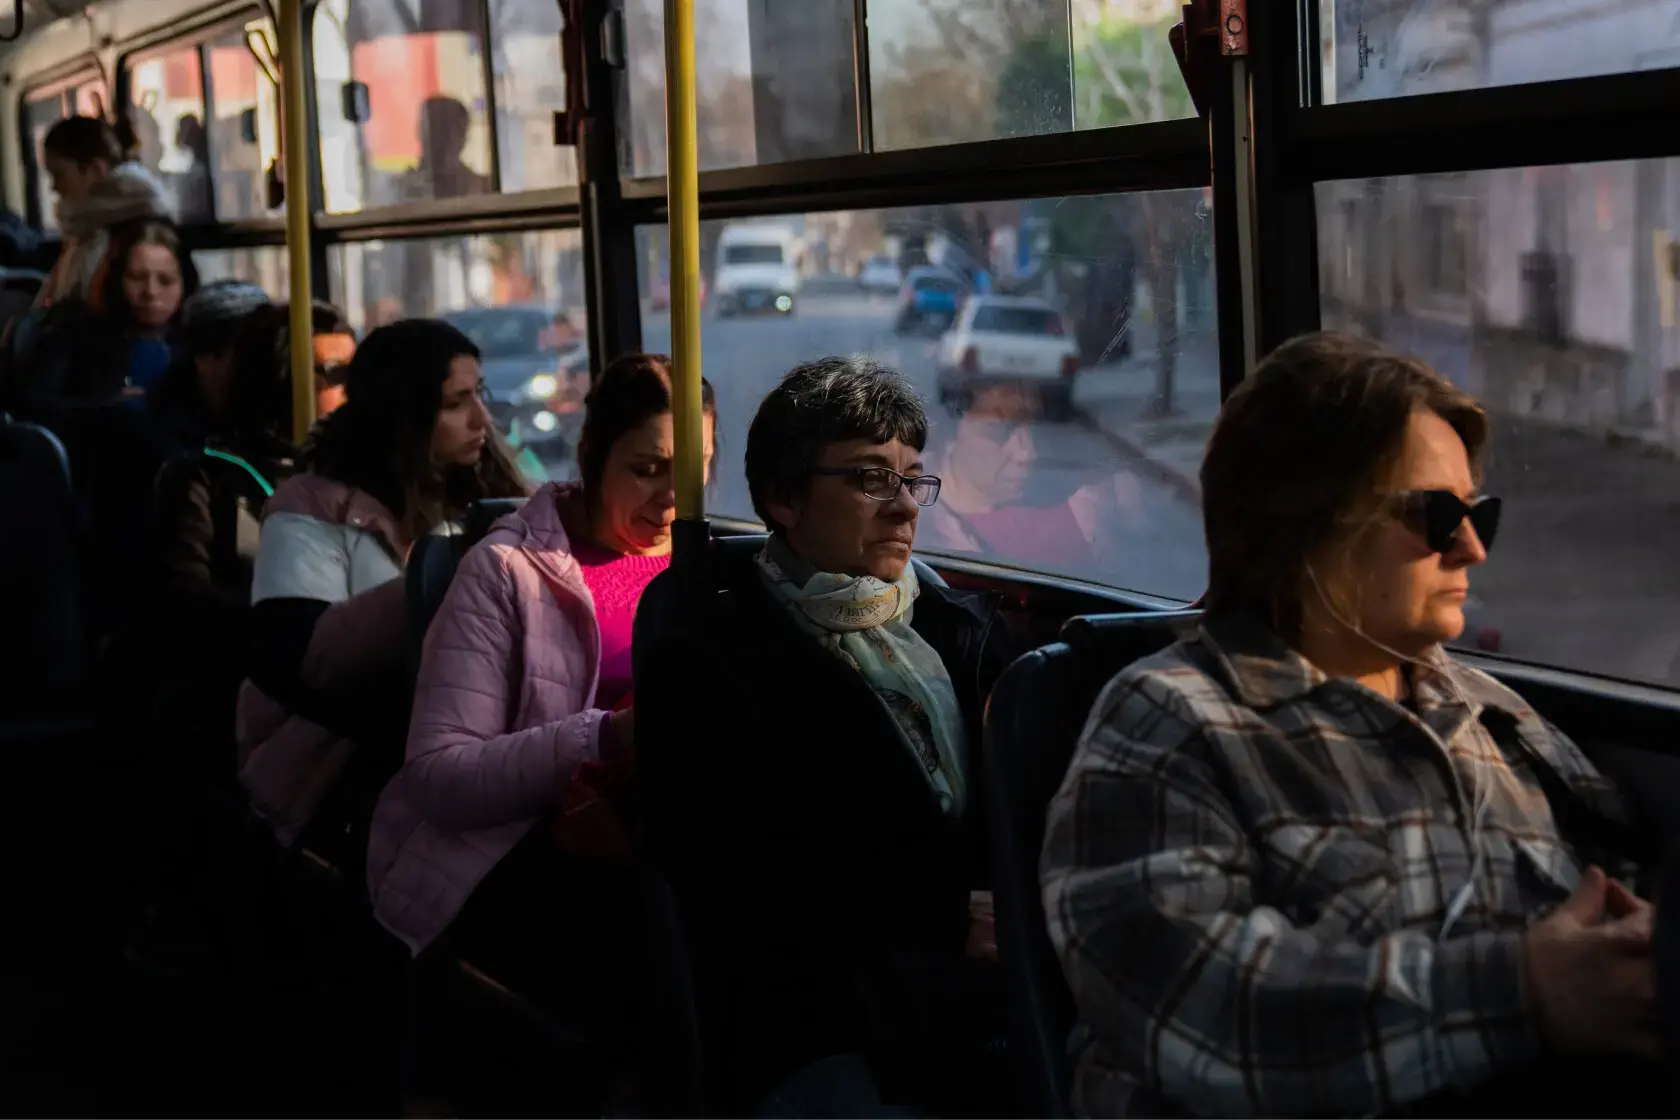 People sit on a public bus. Seven people are in view sitting next to the window.